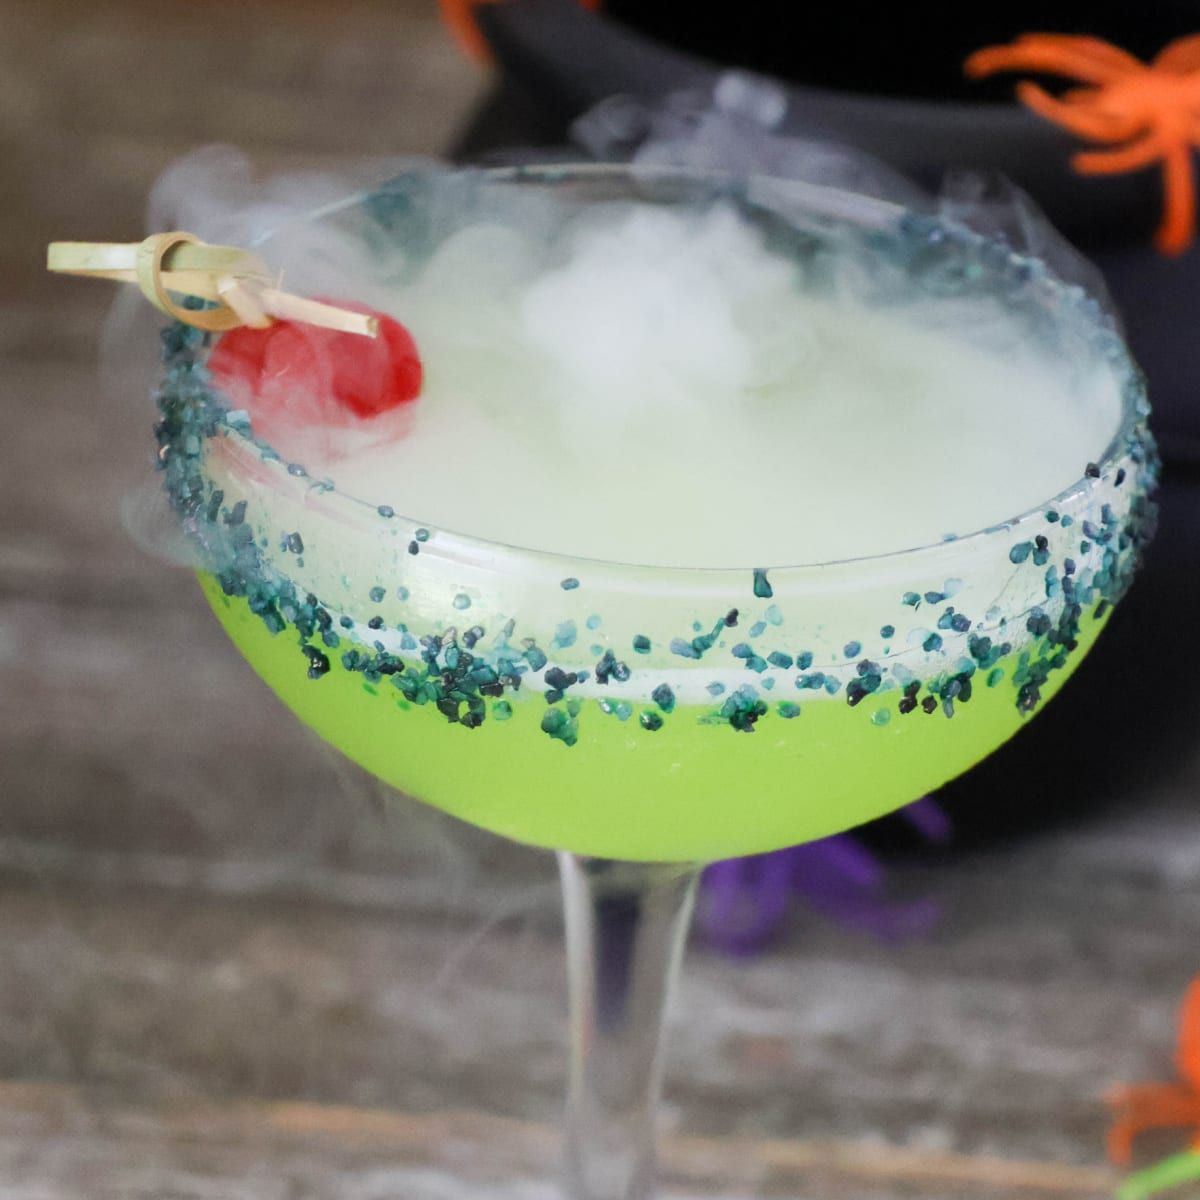 Frankenstein's Brew - easy halloween cocktail with @DrinkMidori Zesty South Indian Kitchen buff.ly/3Fs6lOP #zestysouthindiankitchenrecipes